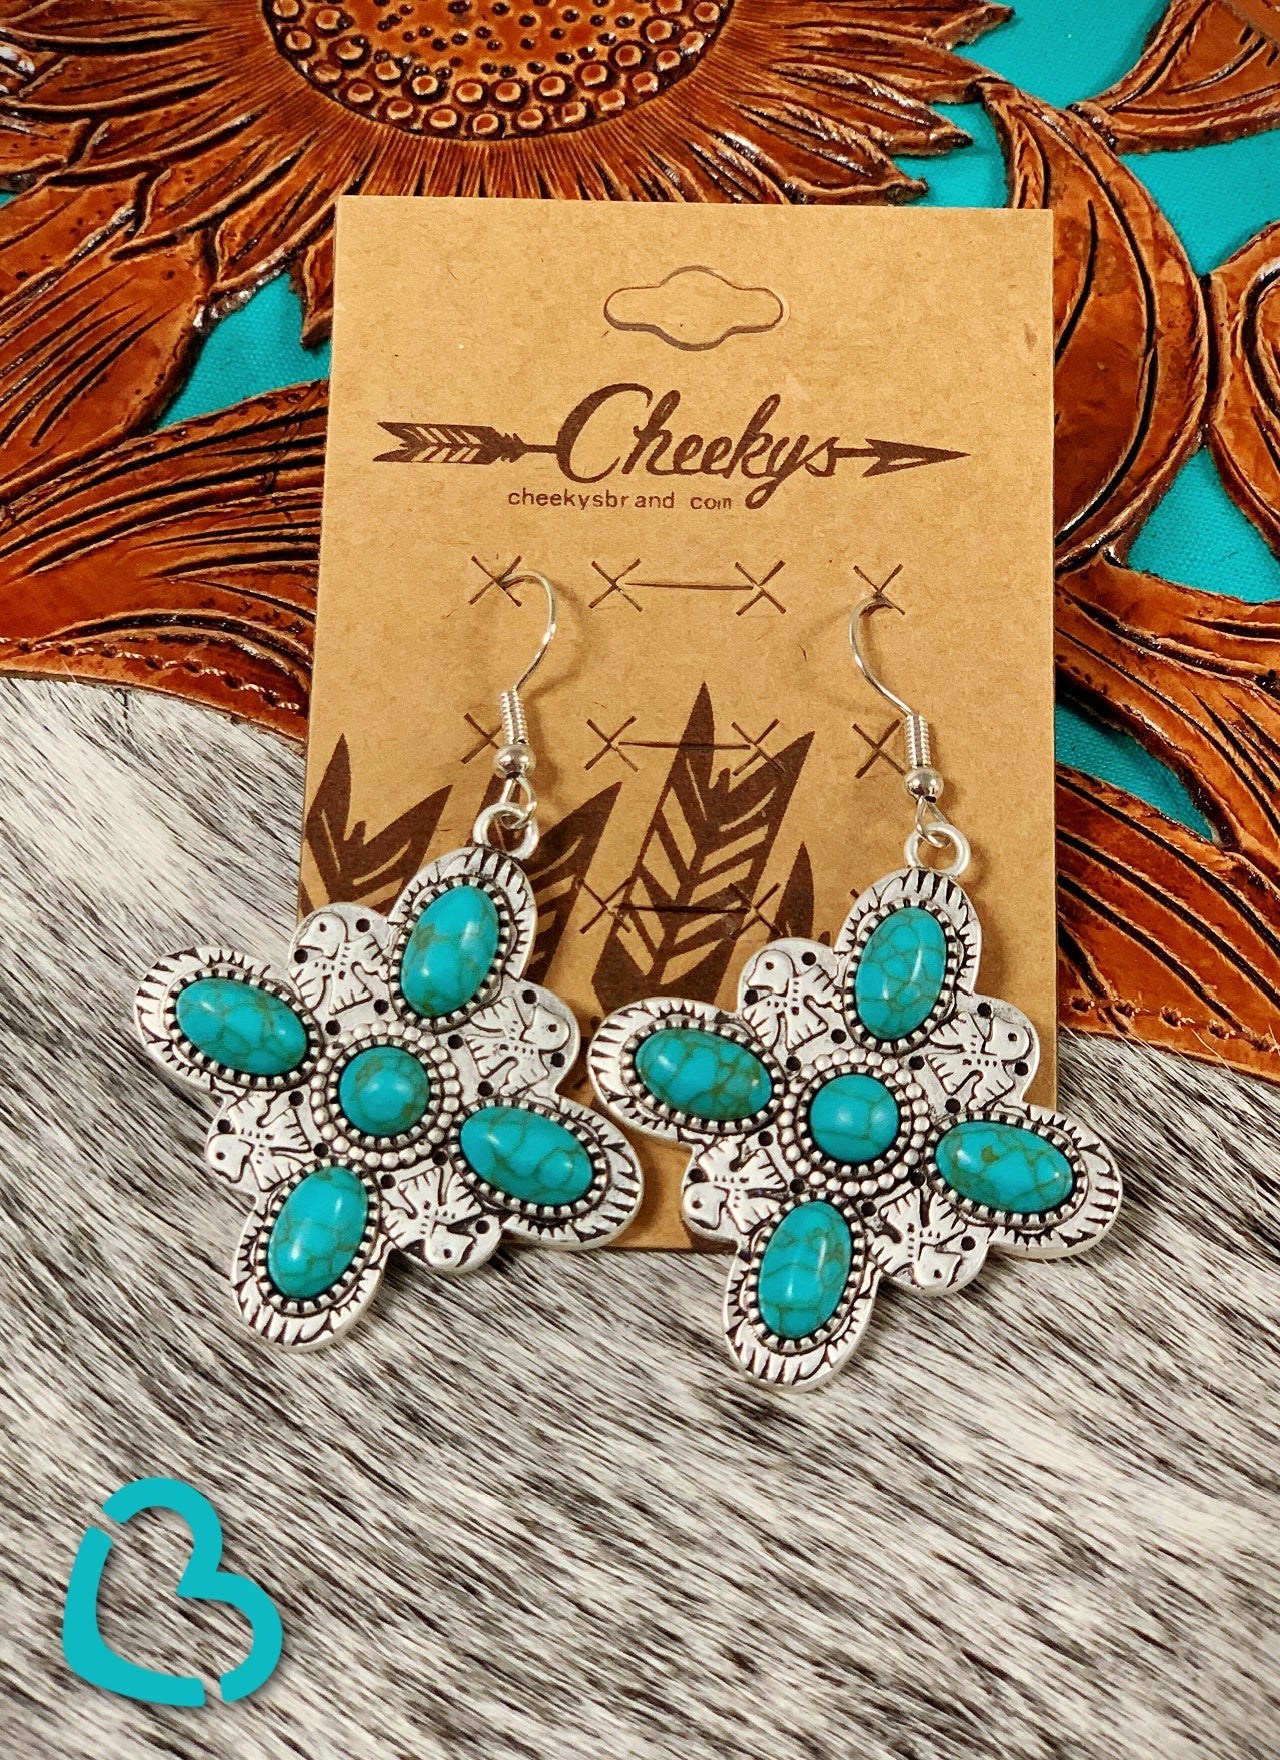 The Starburst Earrings in Turquoise Jewelry 18 